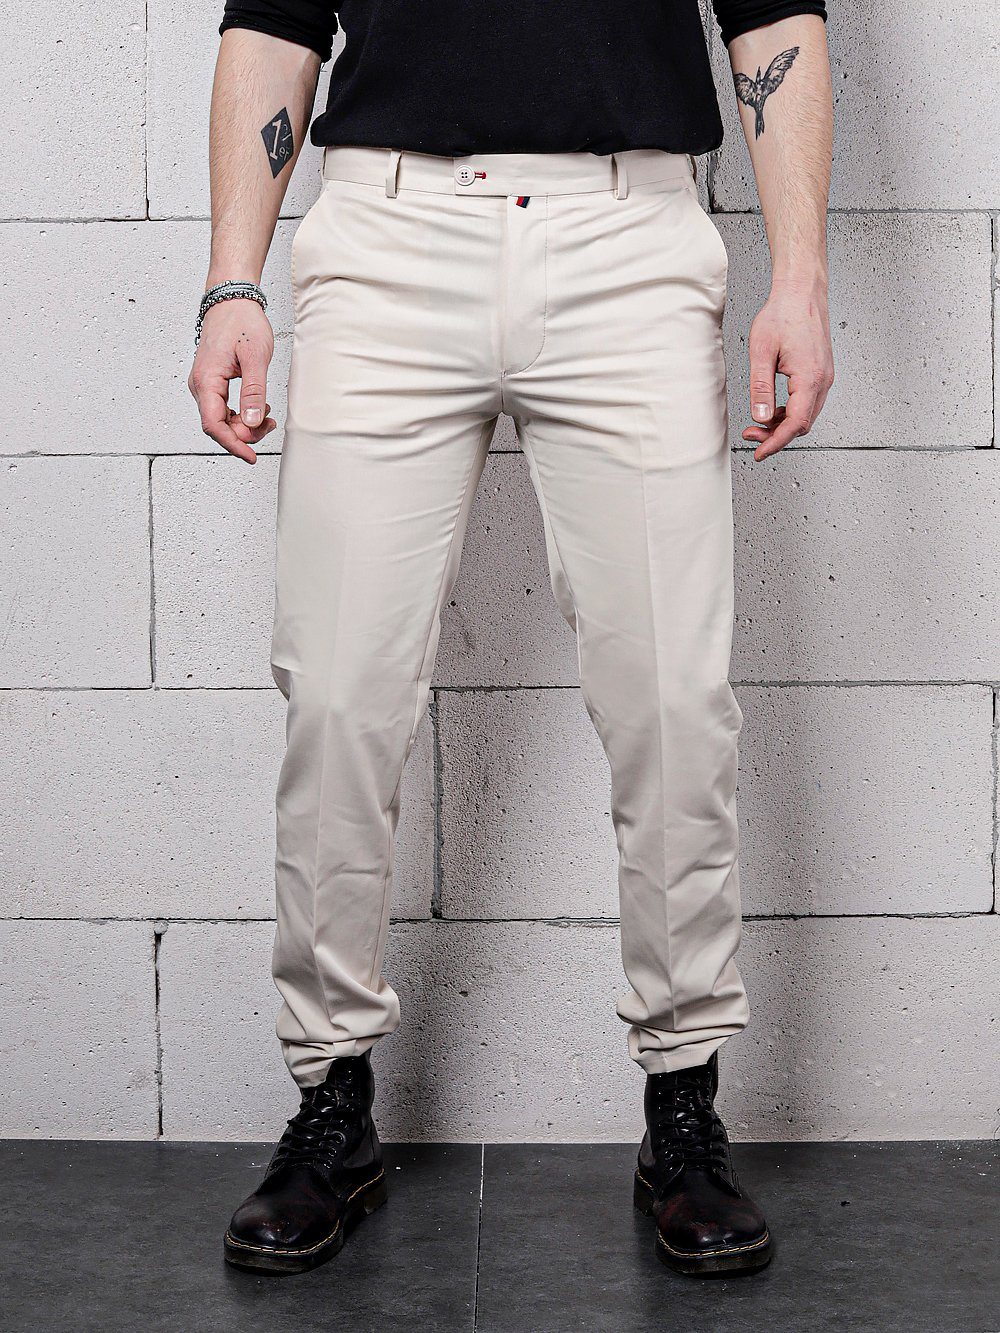 A man wearing beige color Vanilla Pants by SERNES Streetwear with a black shirt